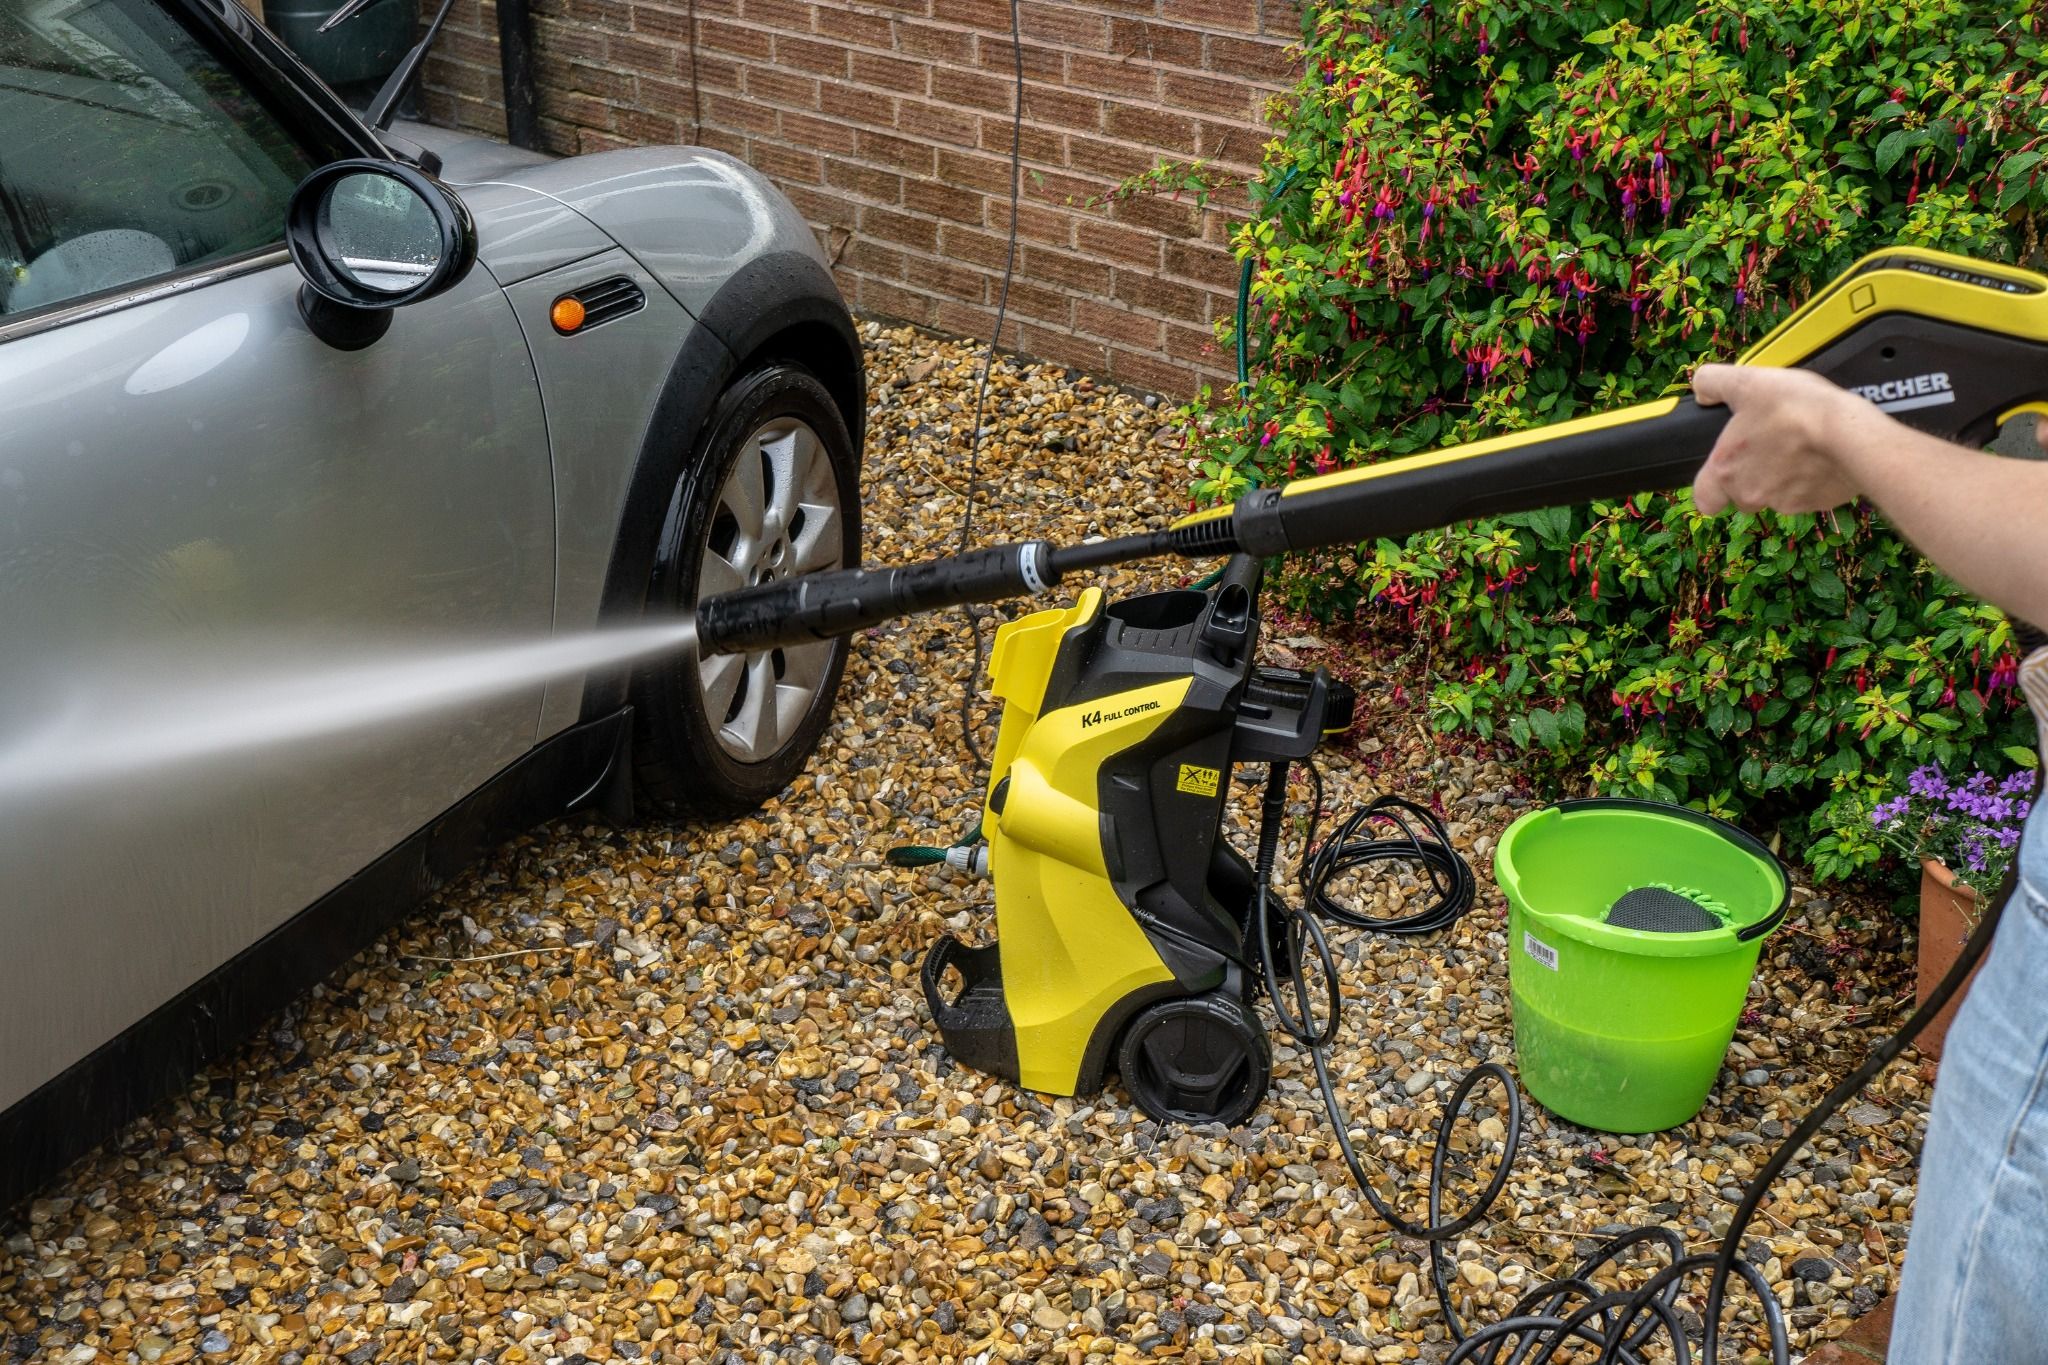 Karcher washer cleaning a car